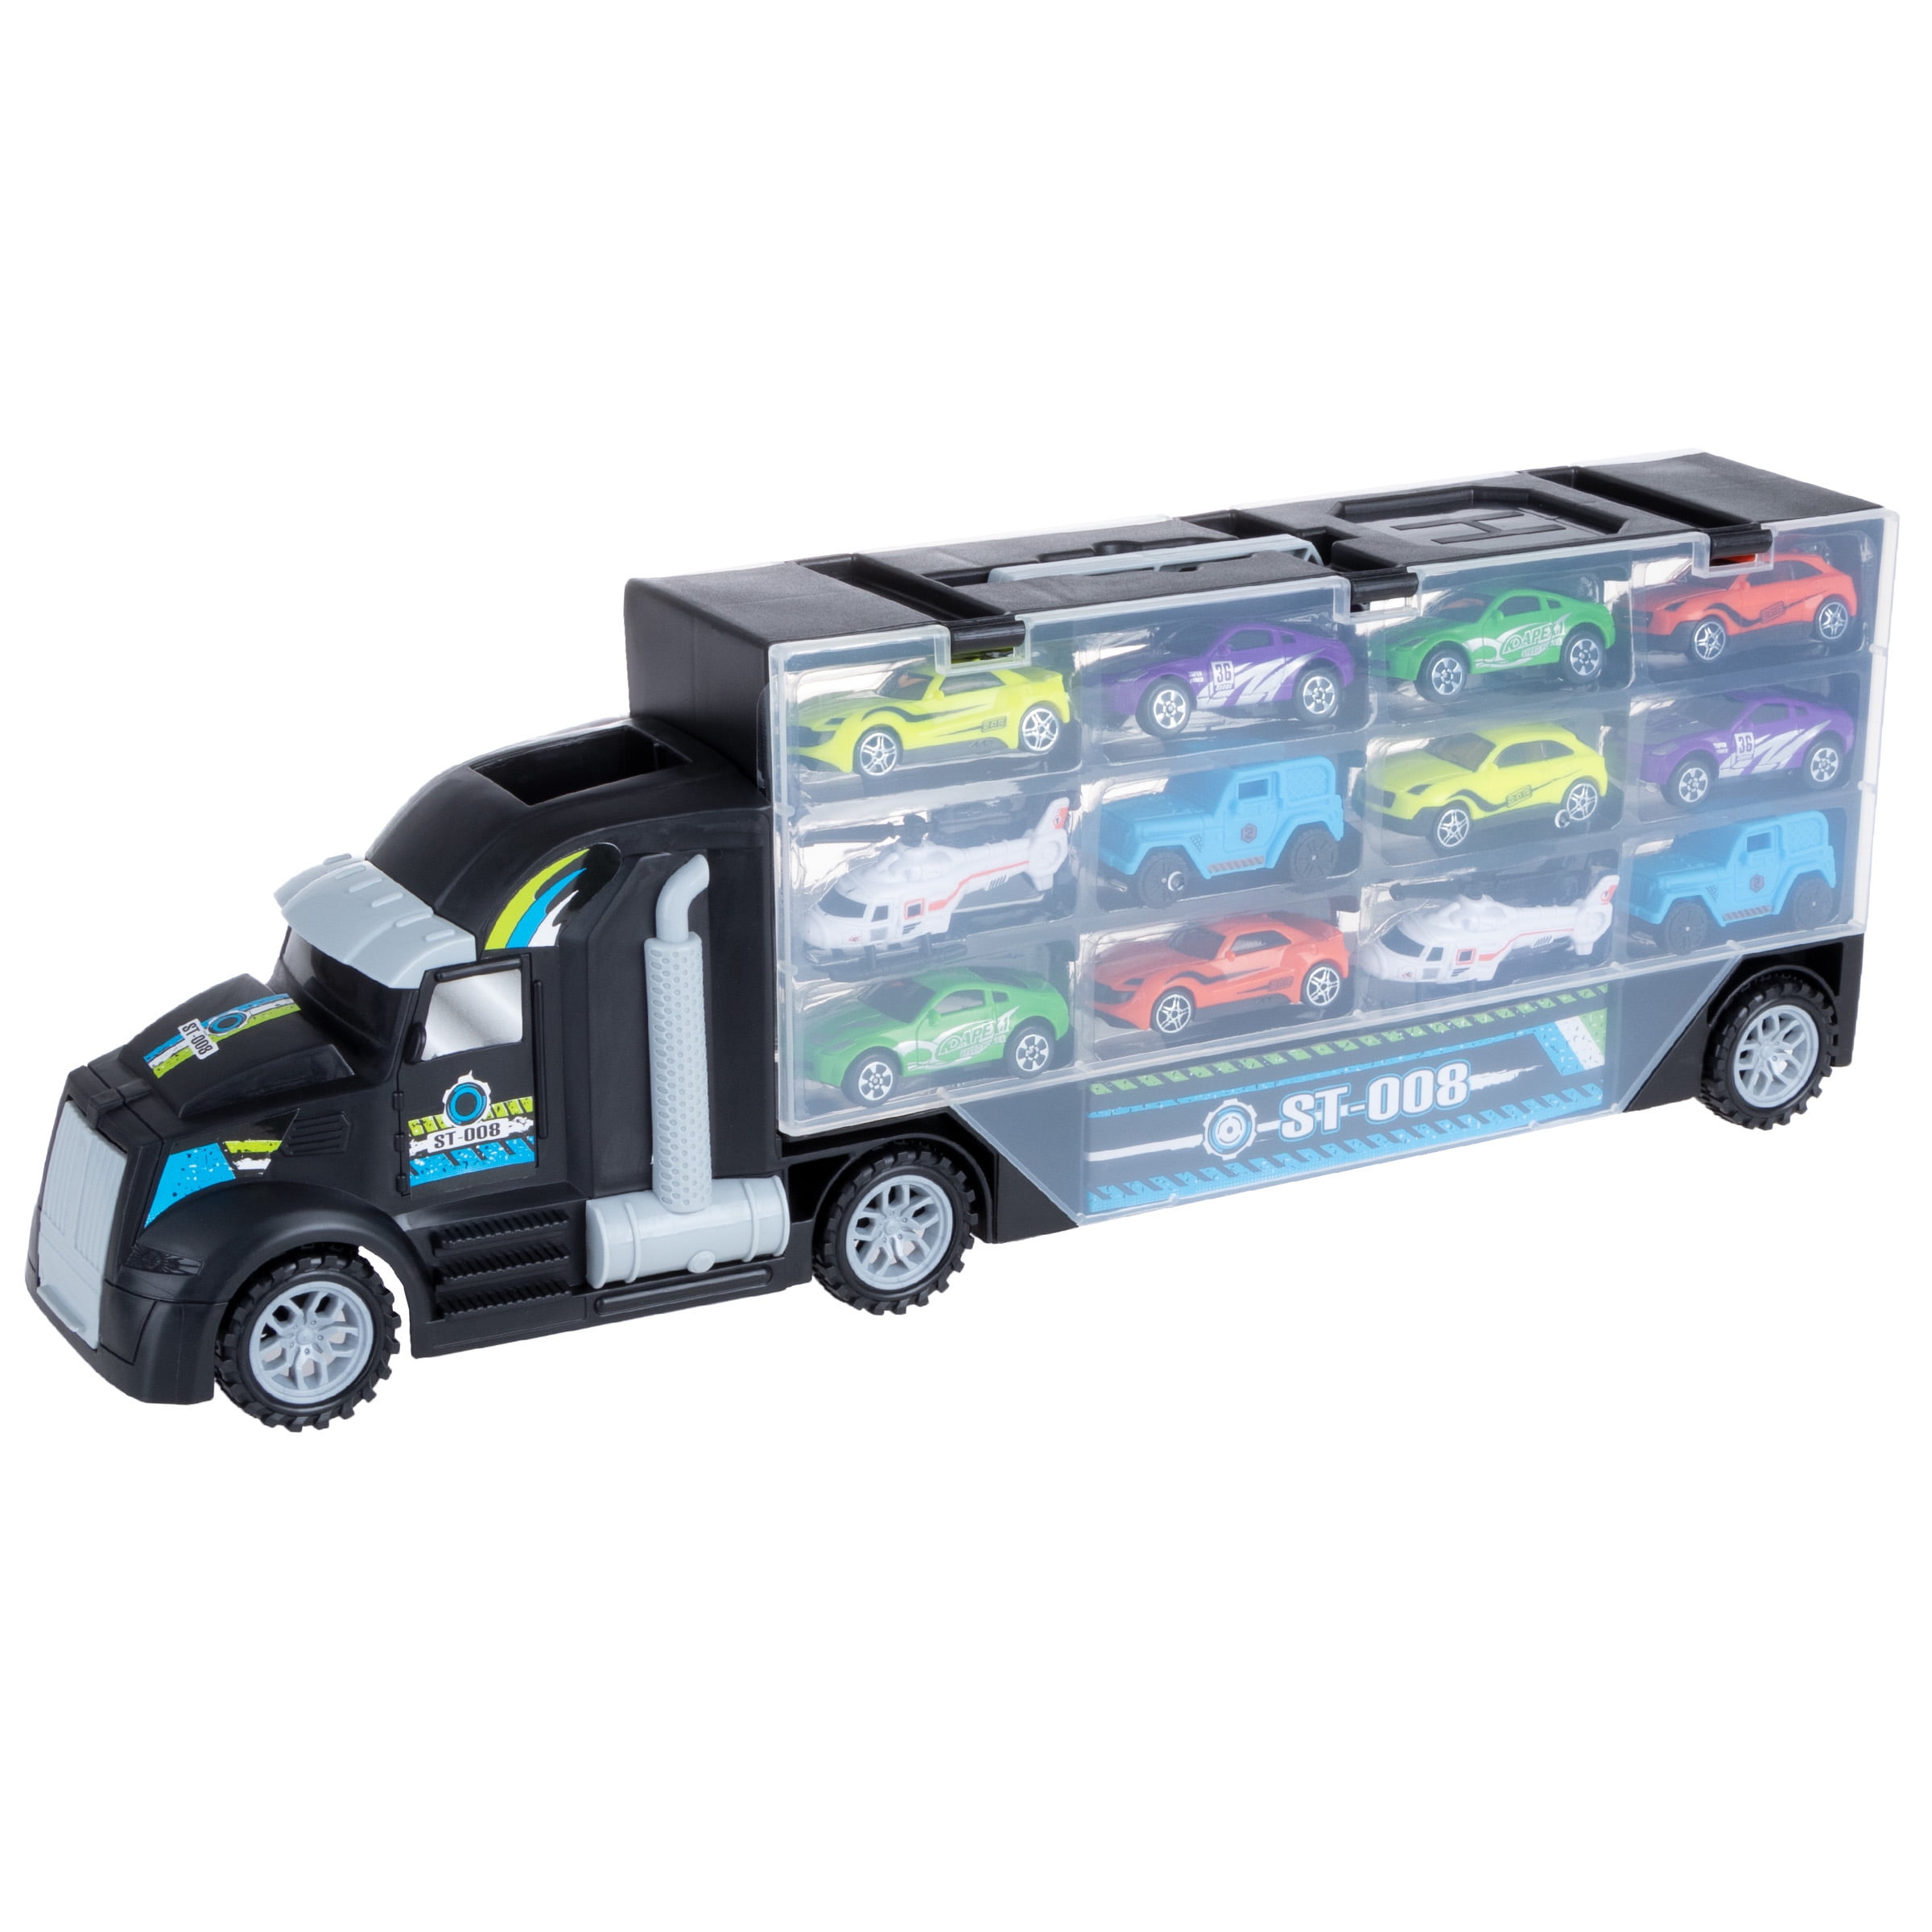 Loaded with Cars Road Signs  More. Details about   Click N' Play Transport Car Carrier Truck 